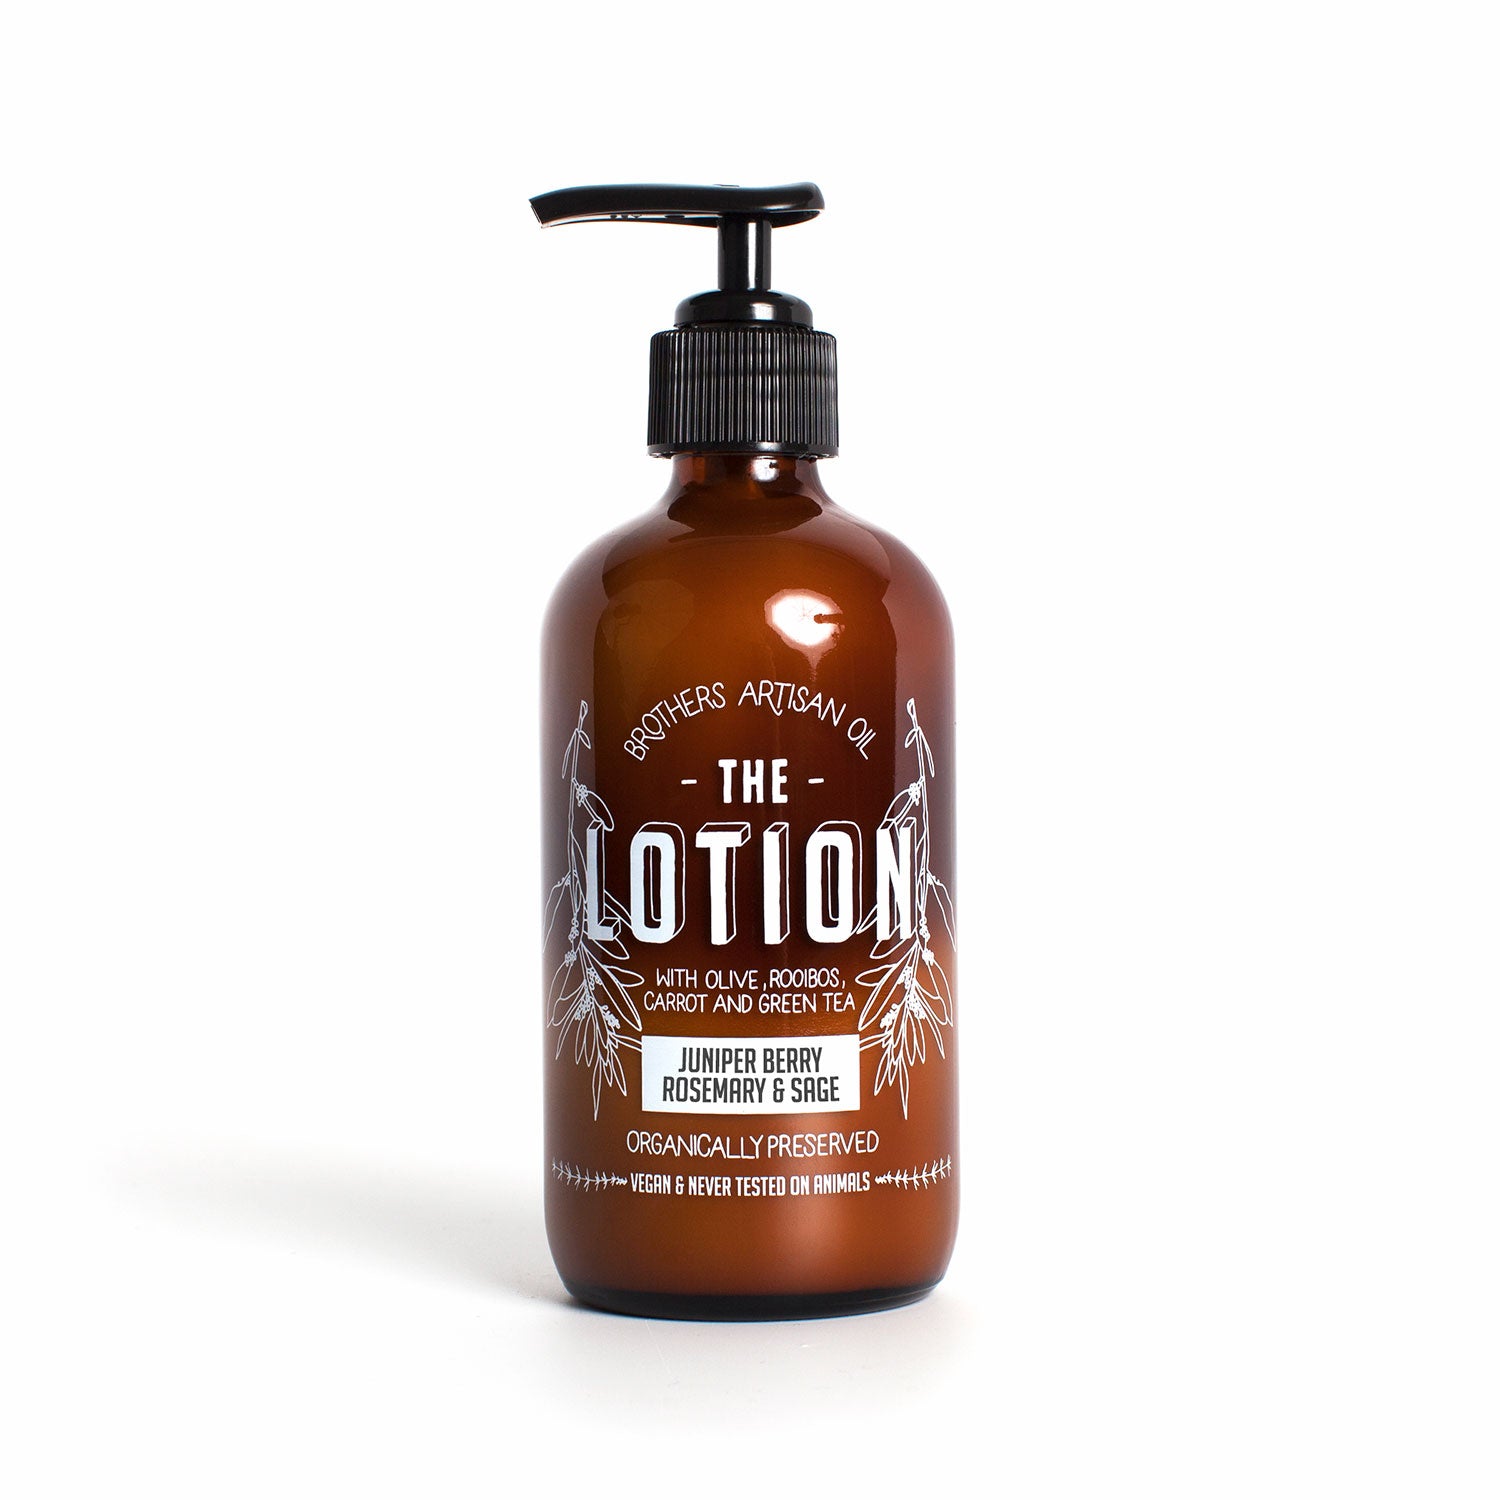 The Lotion: Juniper Berry, Rosemary & Sage